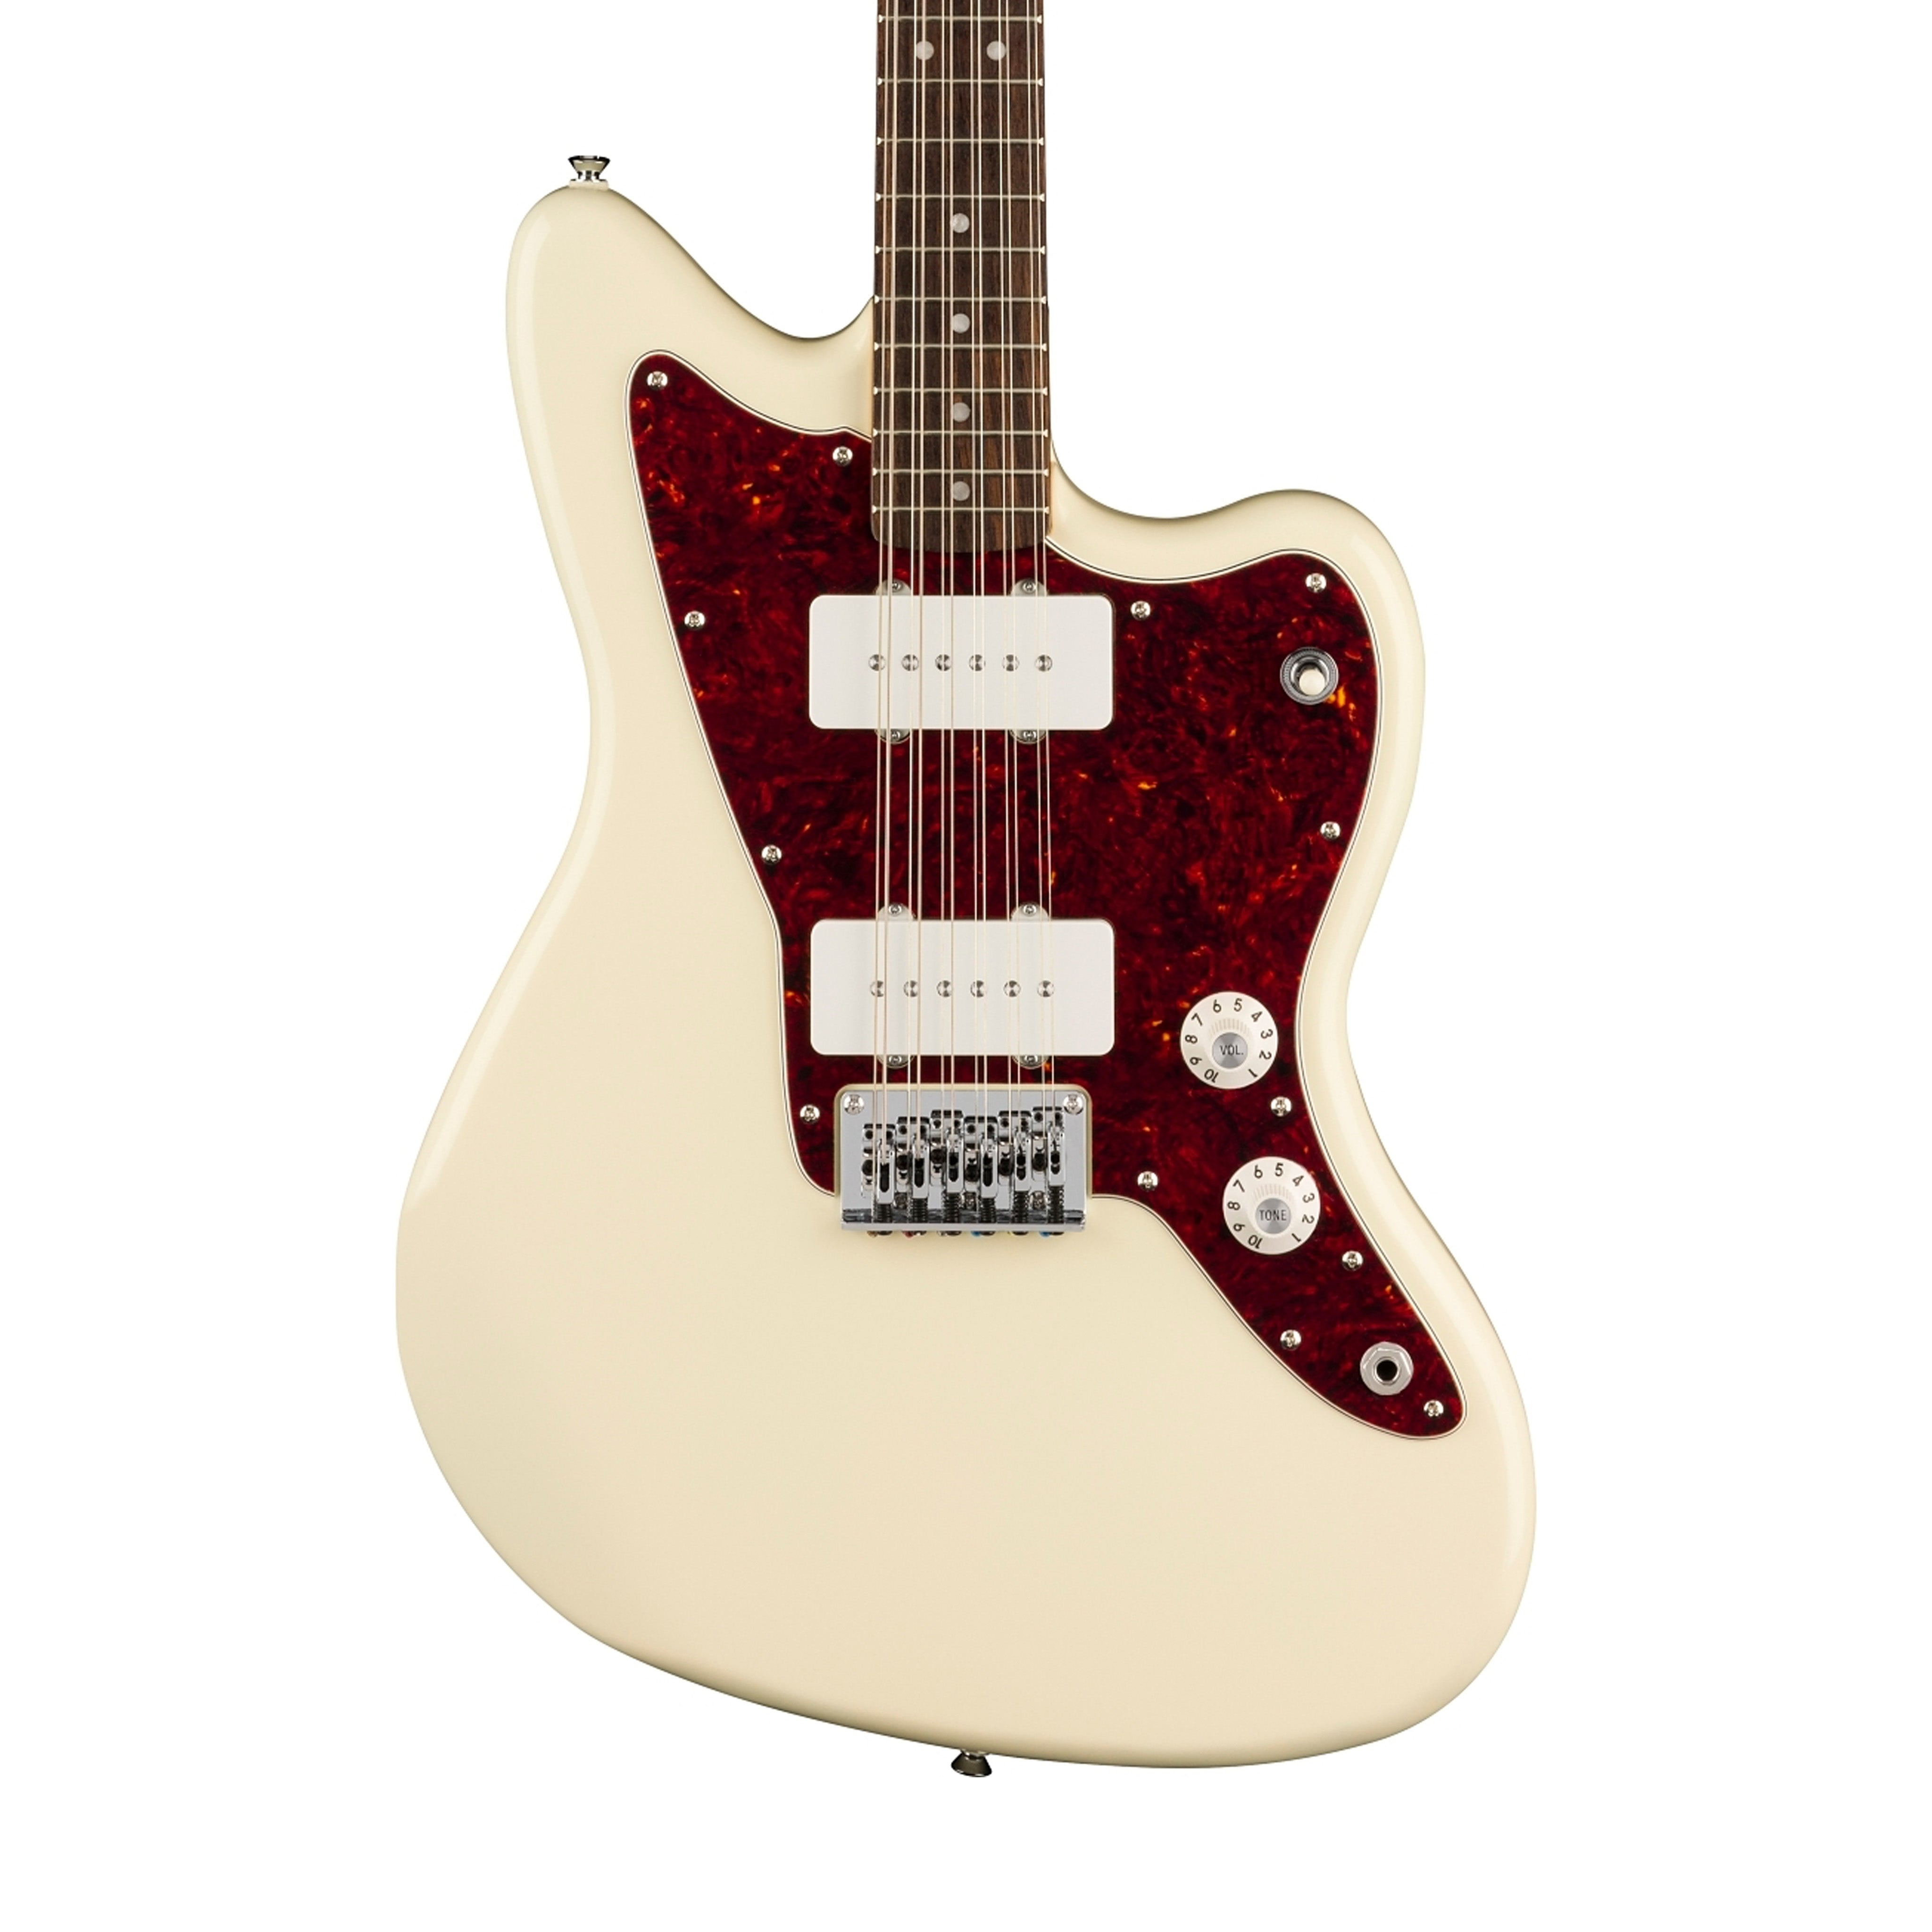 Squier Paranormal Jazzmaster XII 12-String Electric Guitar, Olympic White | Zoso Music Sdn Bhd